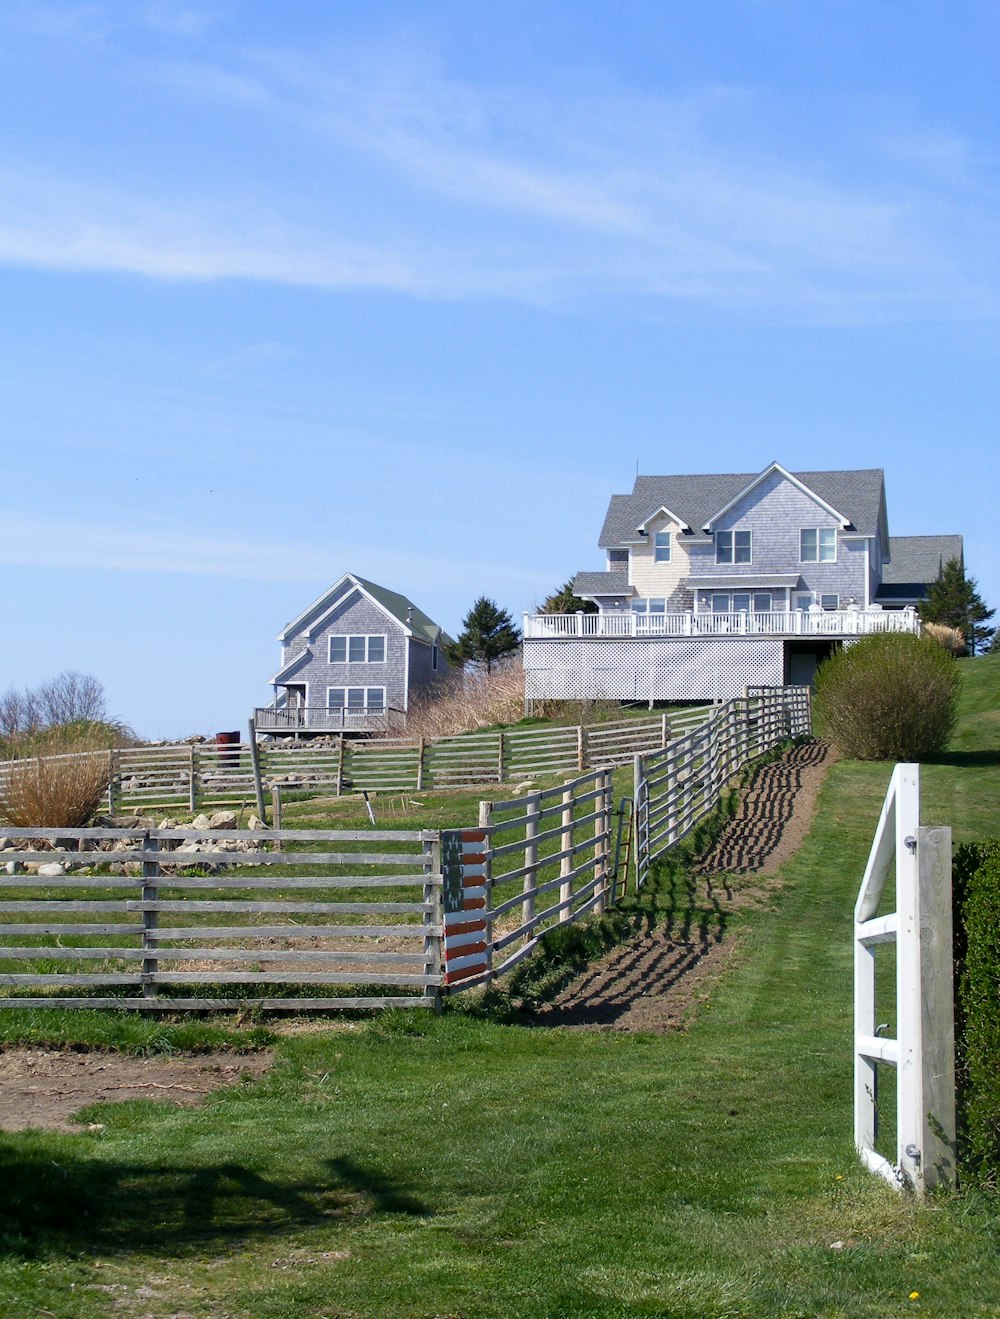 a fenced in field with a house in the background